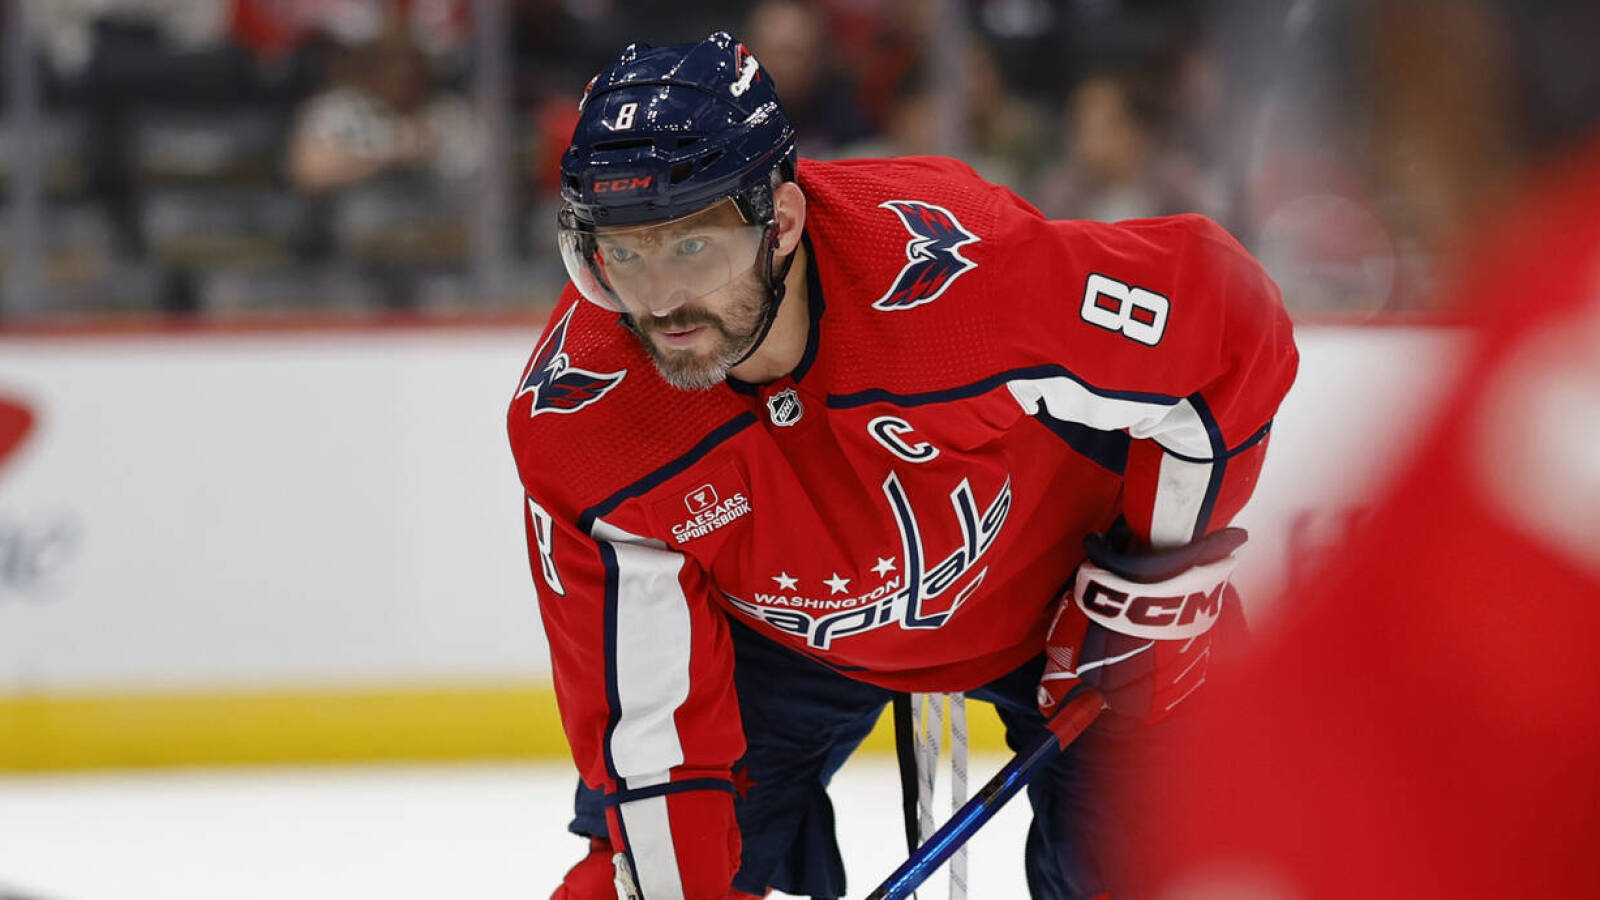 It's panic time for Alex Ovechkin, struggling Washington Capitals